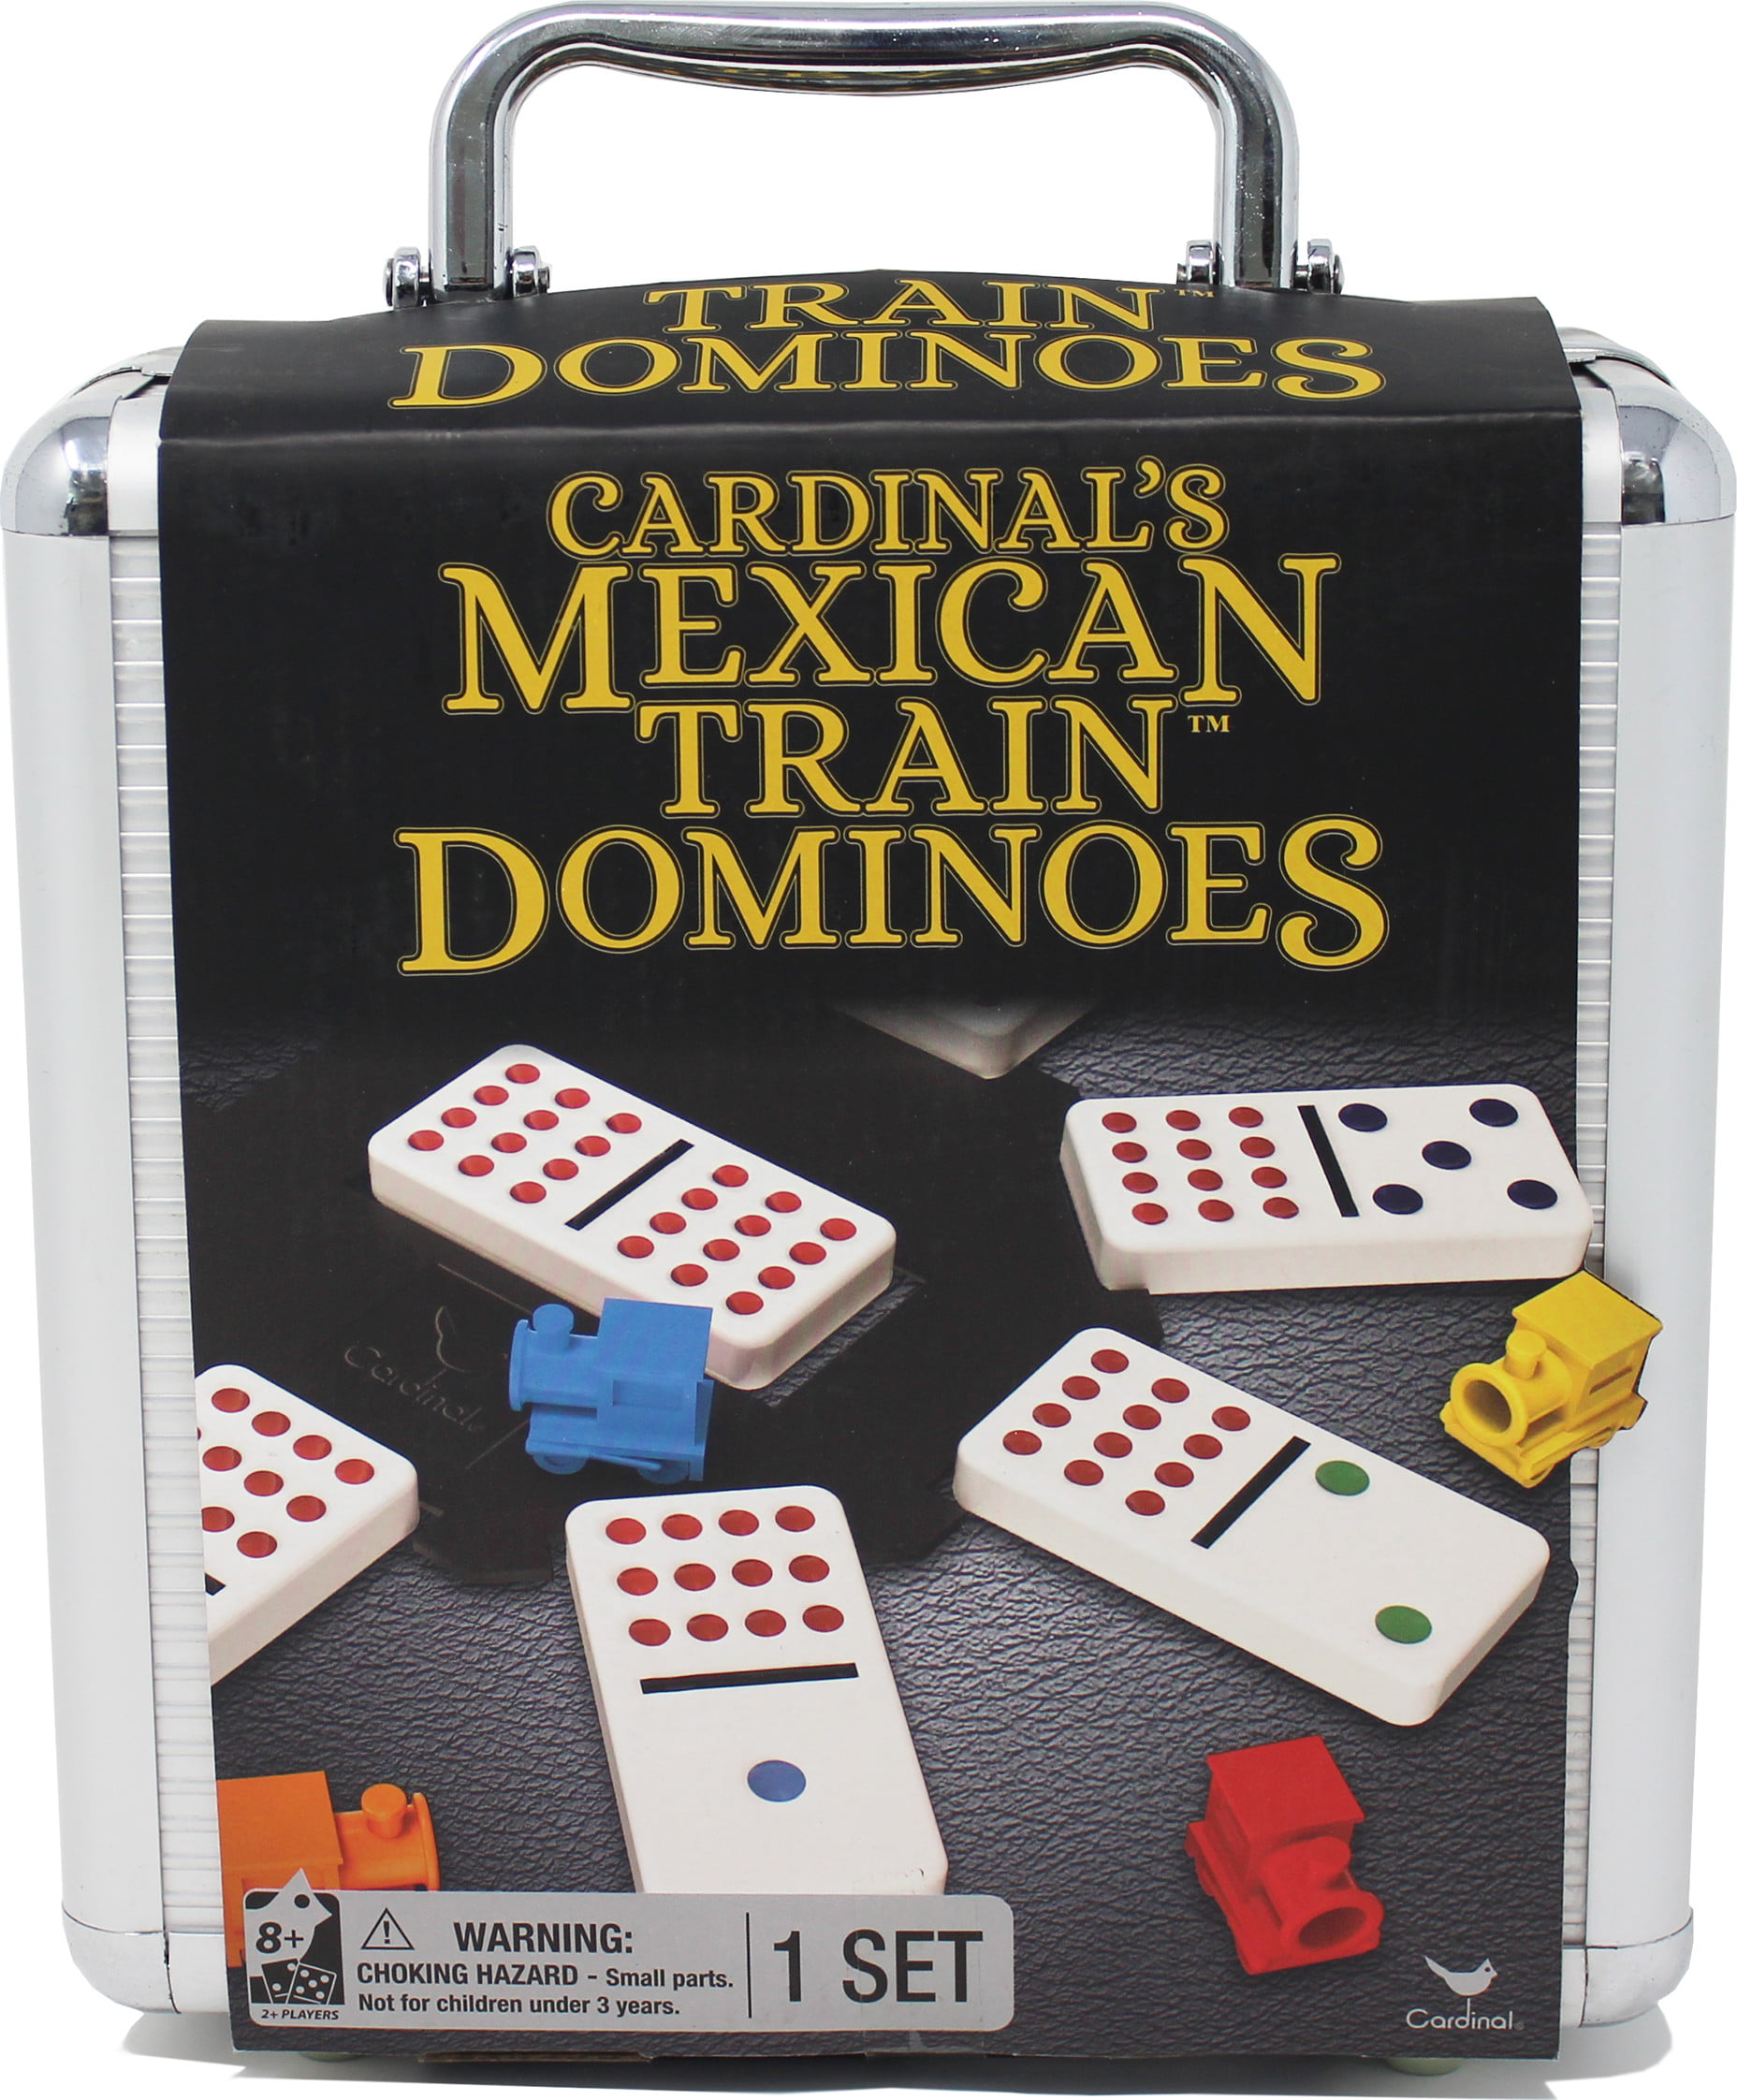 Mexican Train Dominoes Game Set Double 12 Color Domino Cardinal Aluminum Case 